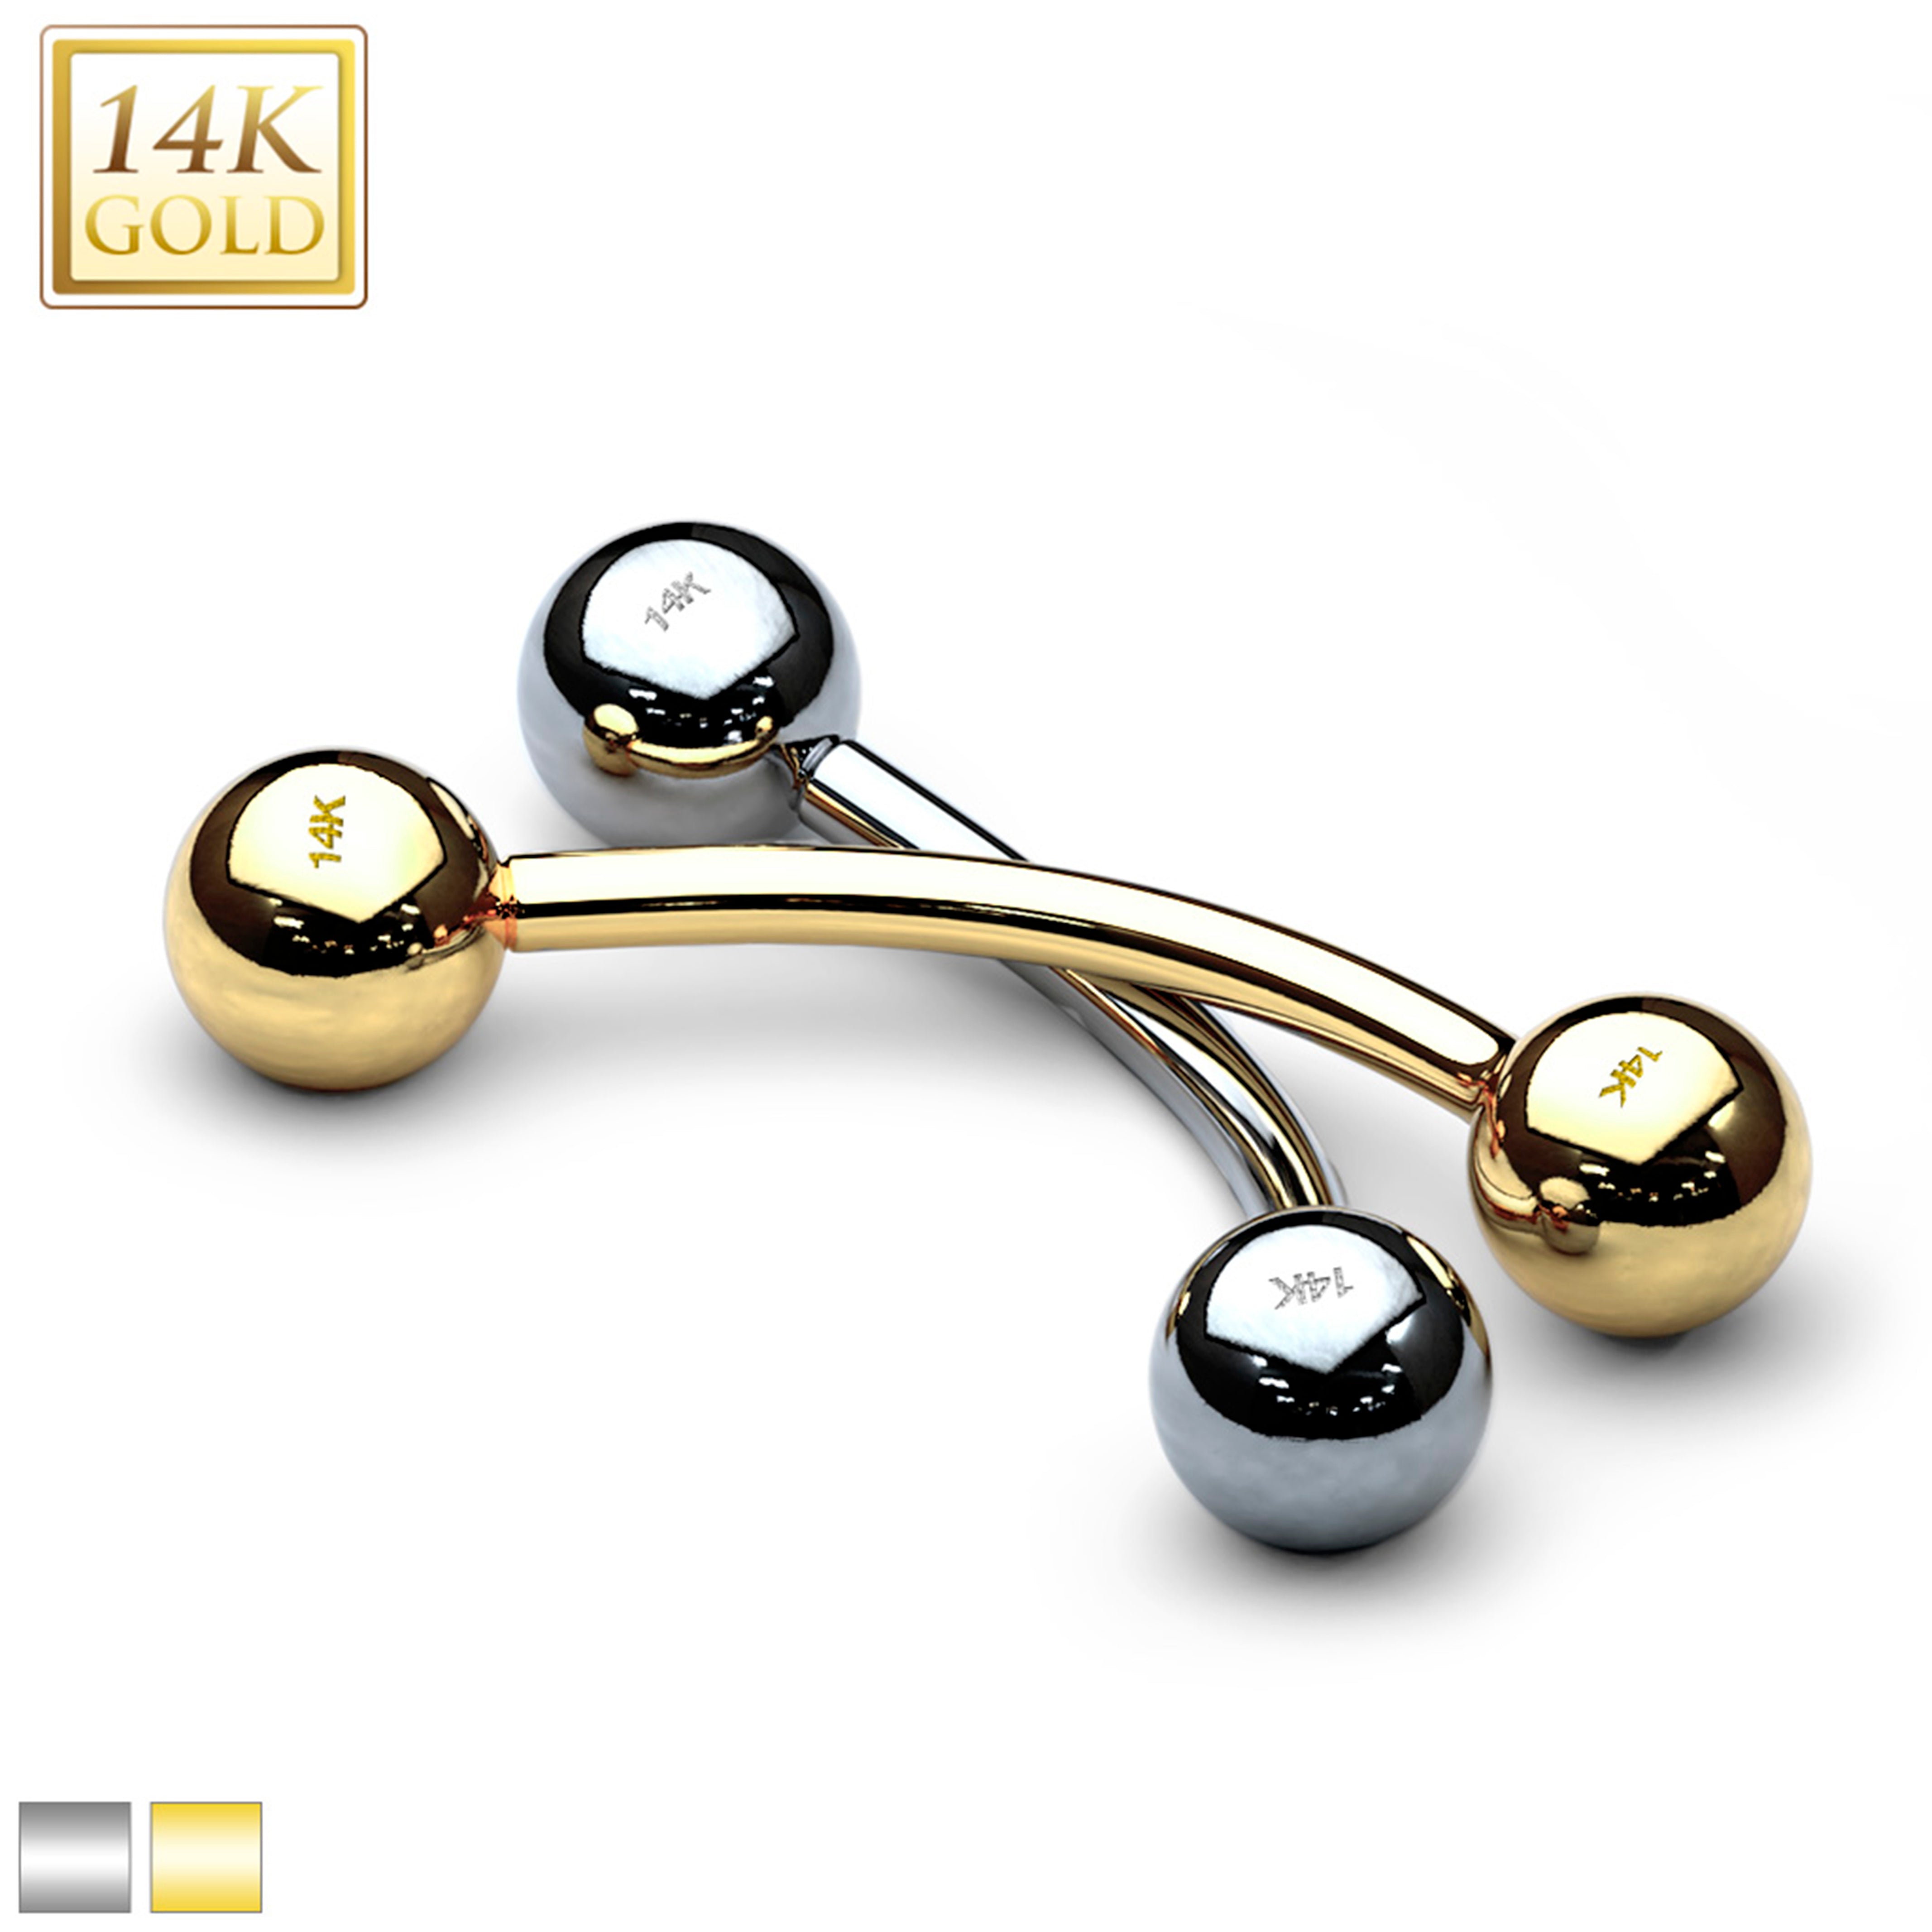 14kt Solid Gold 14 Gauge Curved Barbell with 4mm Balls